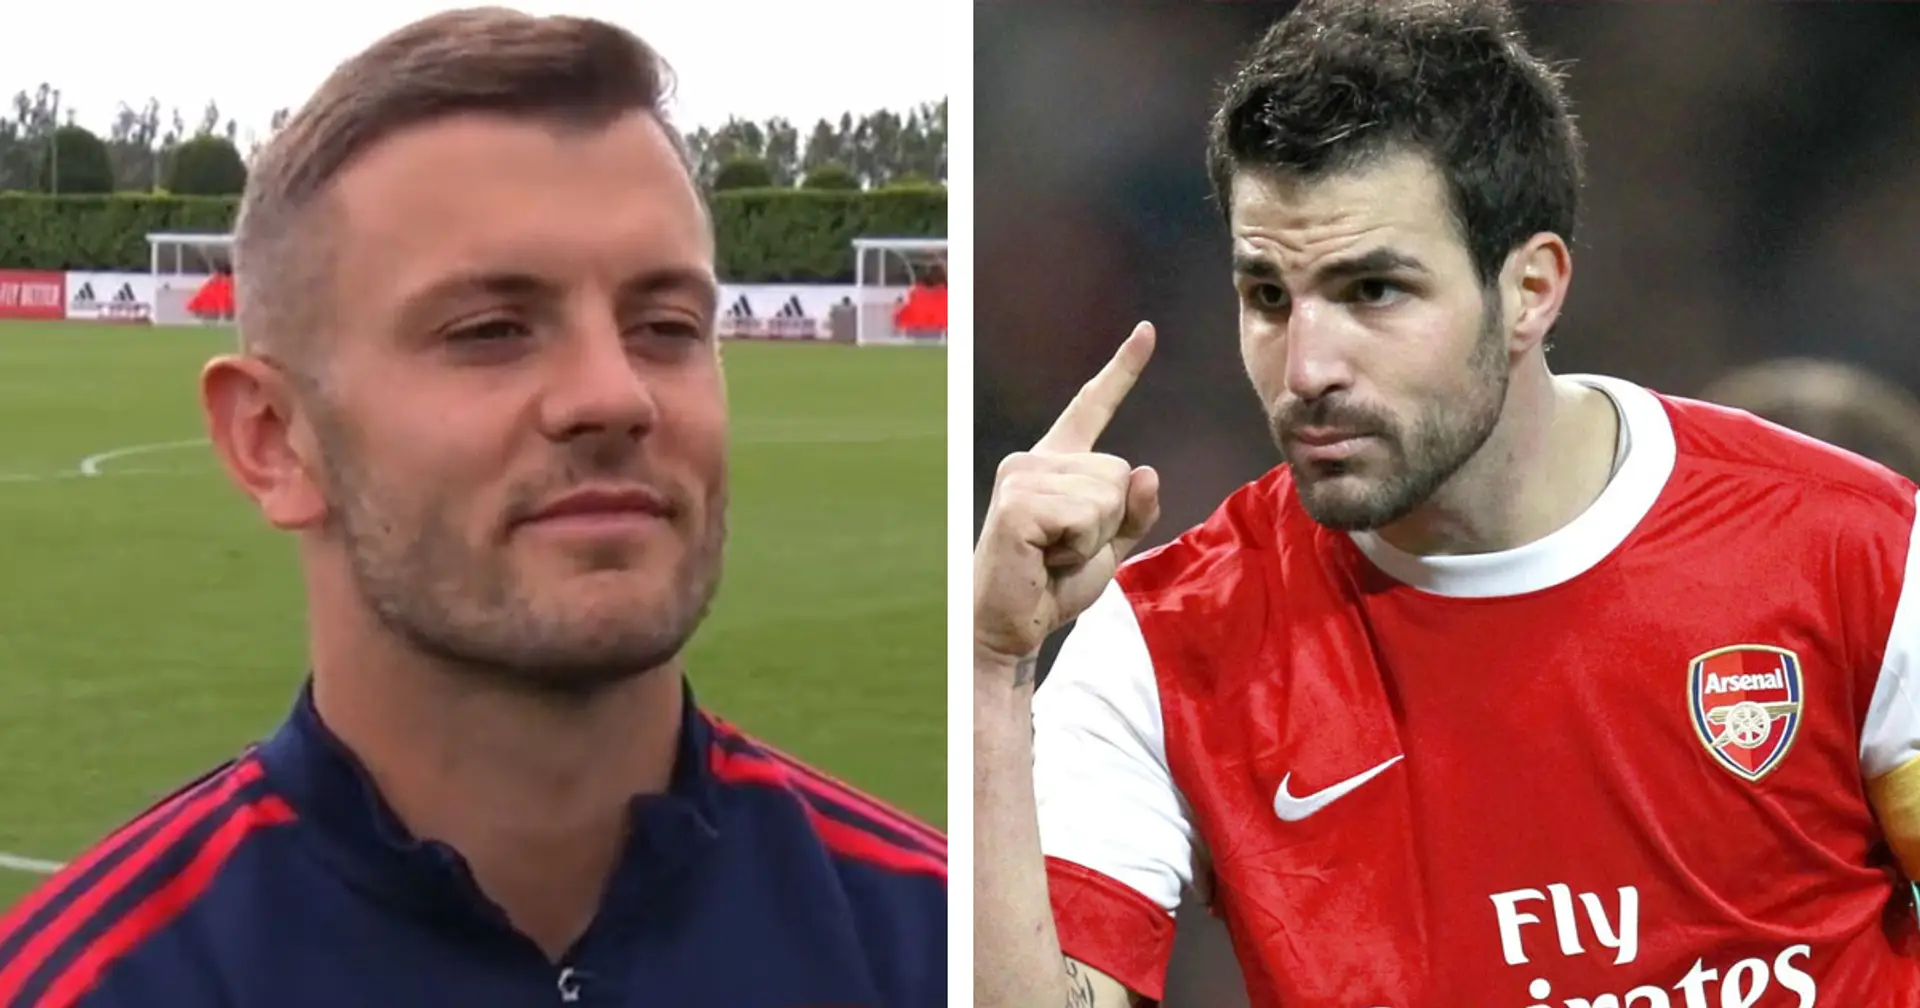 'The boys were a bit shocked': Jack Wilshere reveals Cesc Fabregas' role to helping him get first win as Arsenal U18s coach